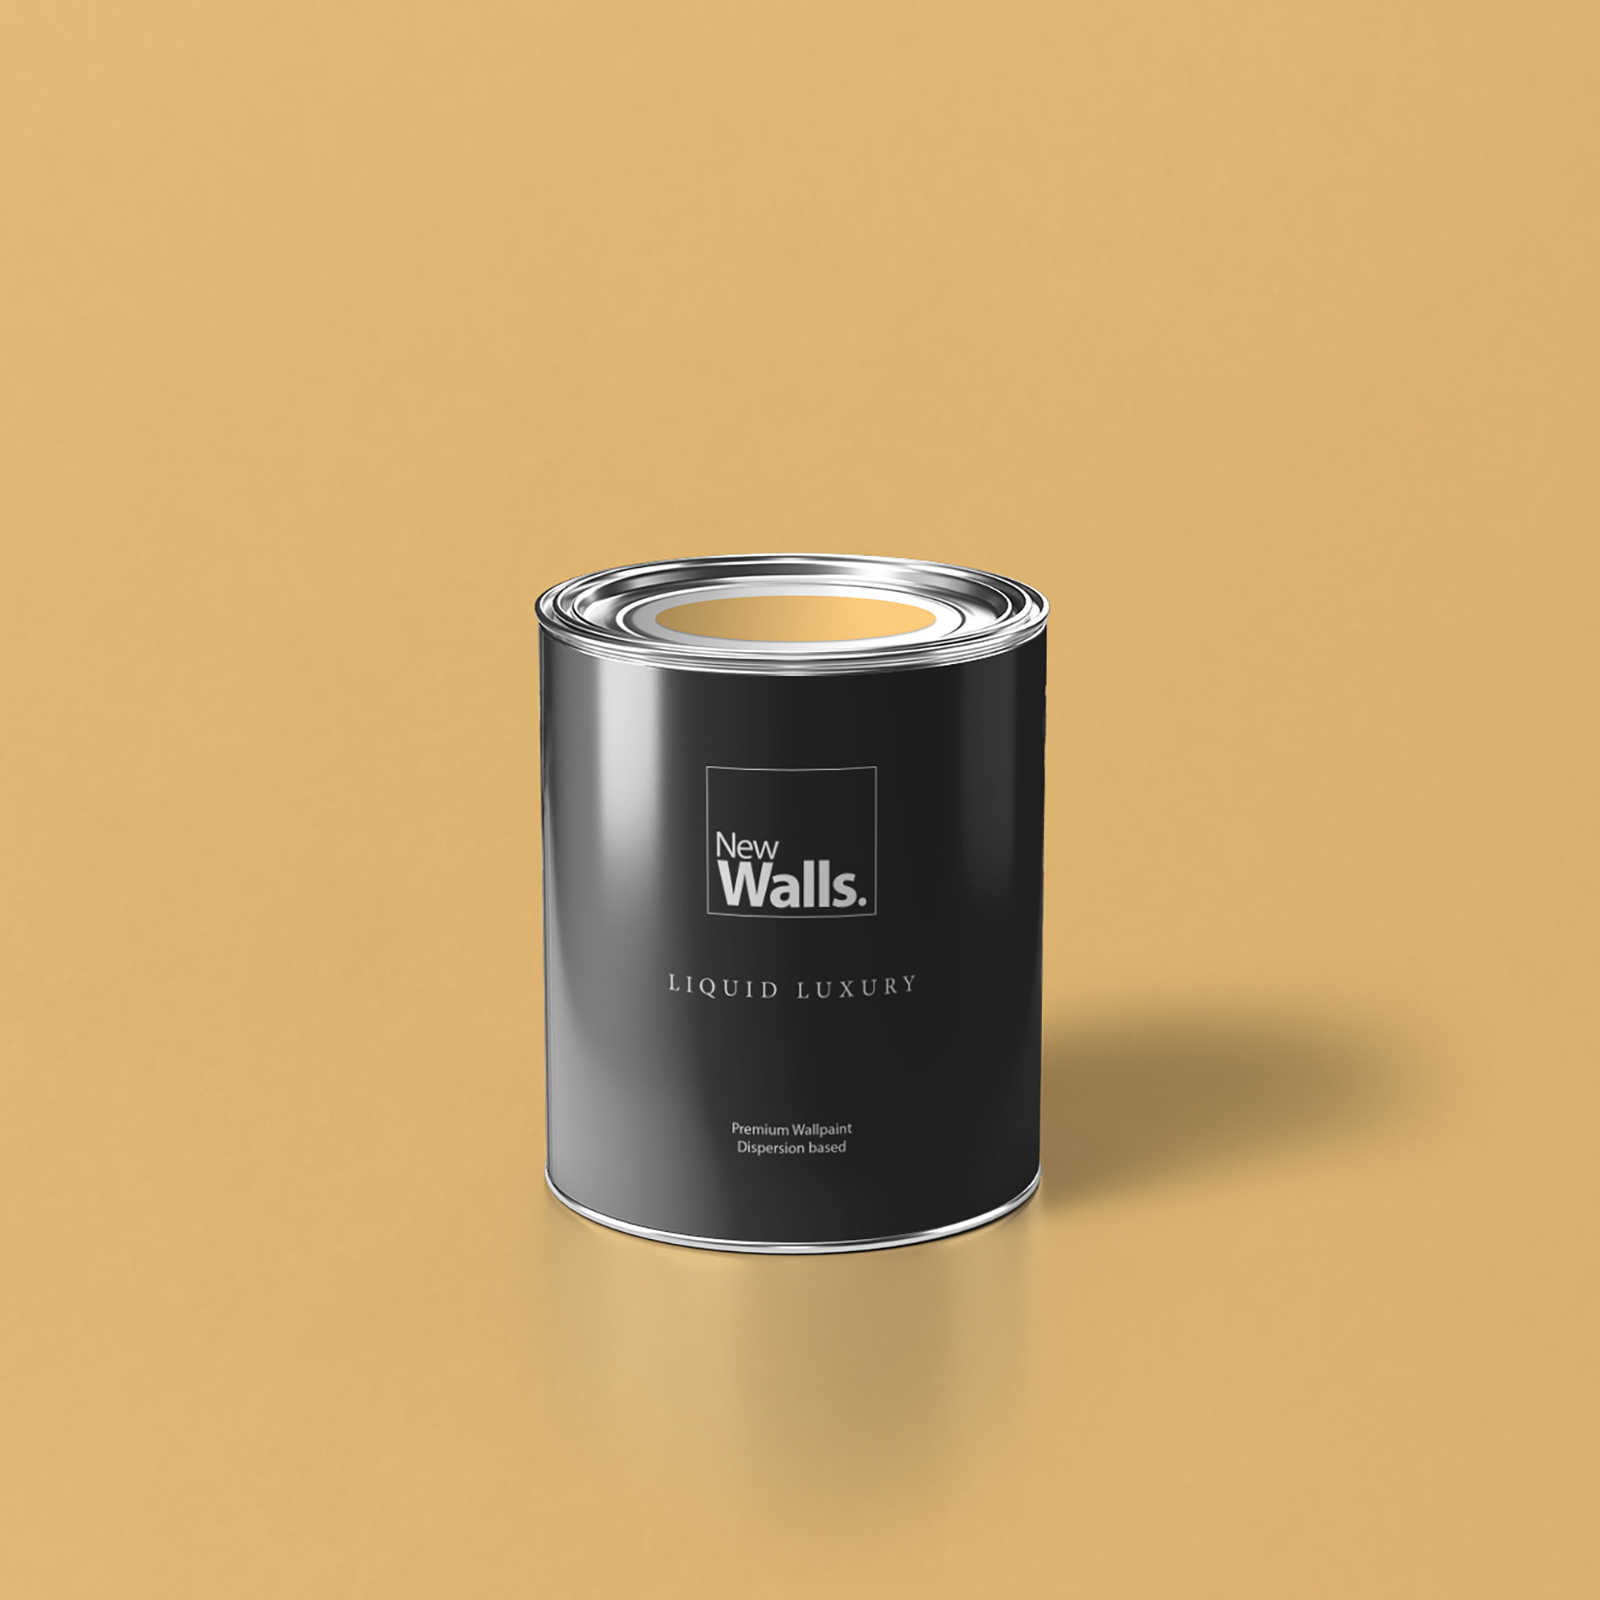         Premium Wall Paint cheerful gold »Juicy Yellow« NW804 – 1 litre
    